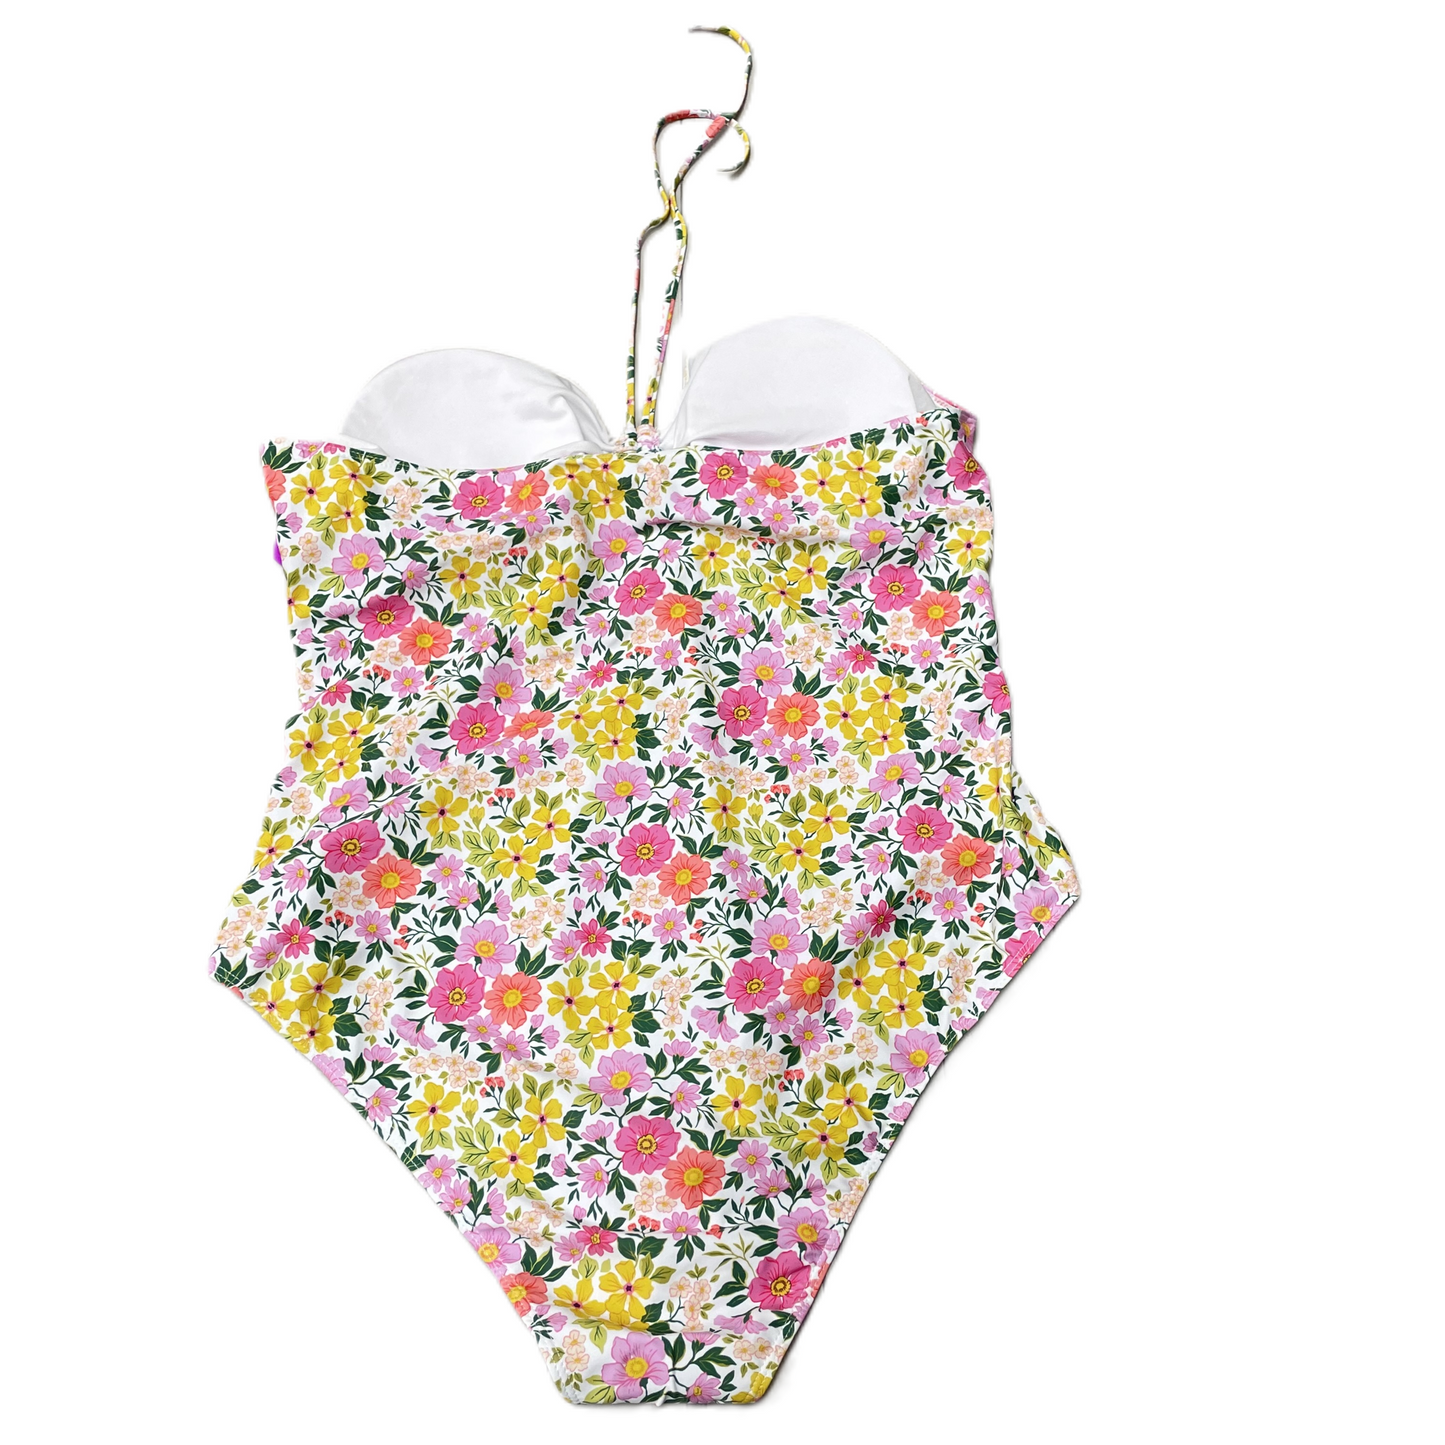 Floral Swimsuit By Shein, Size: 4x